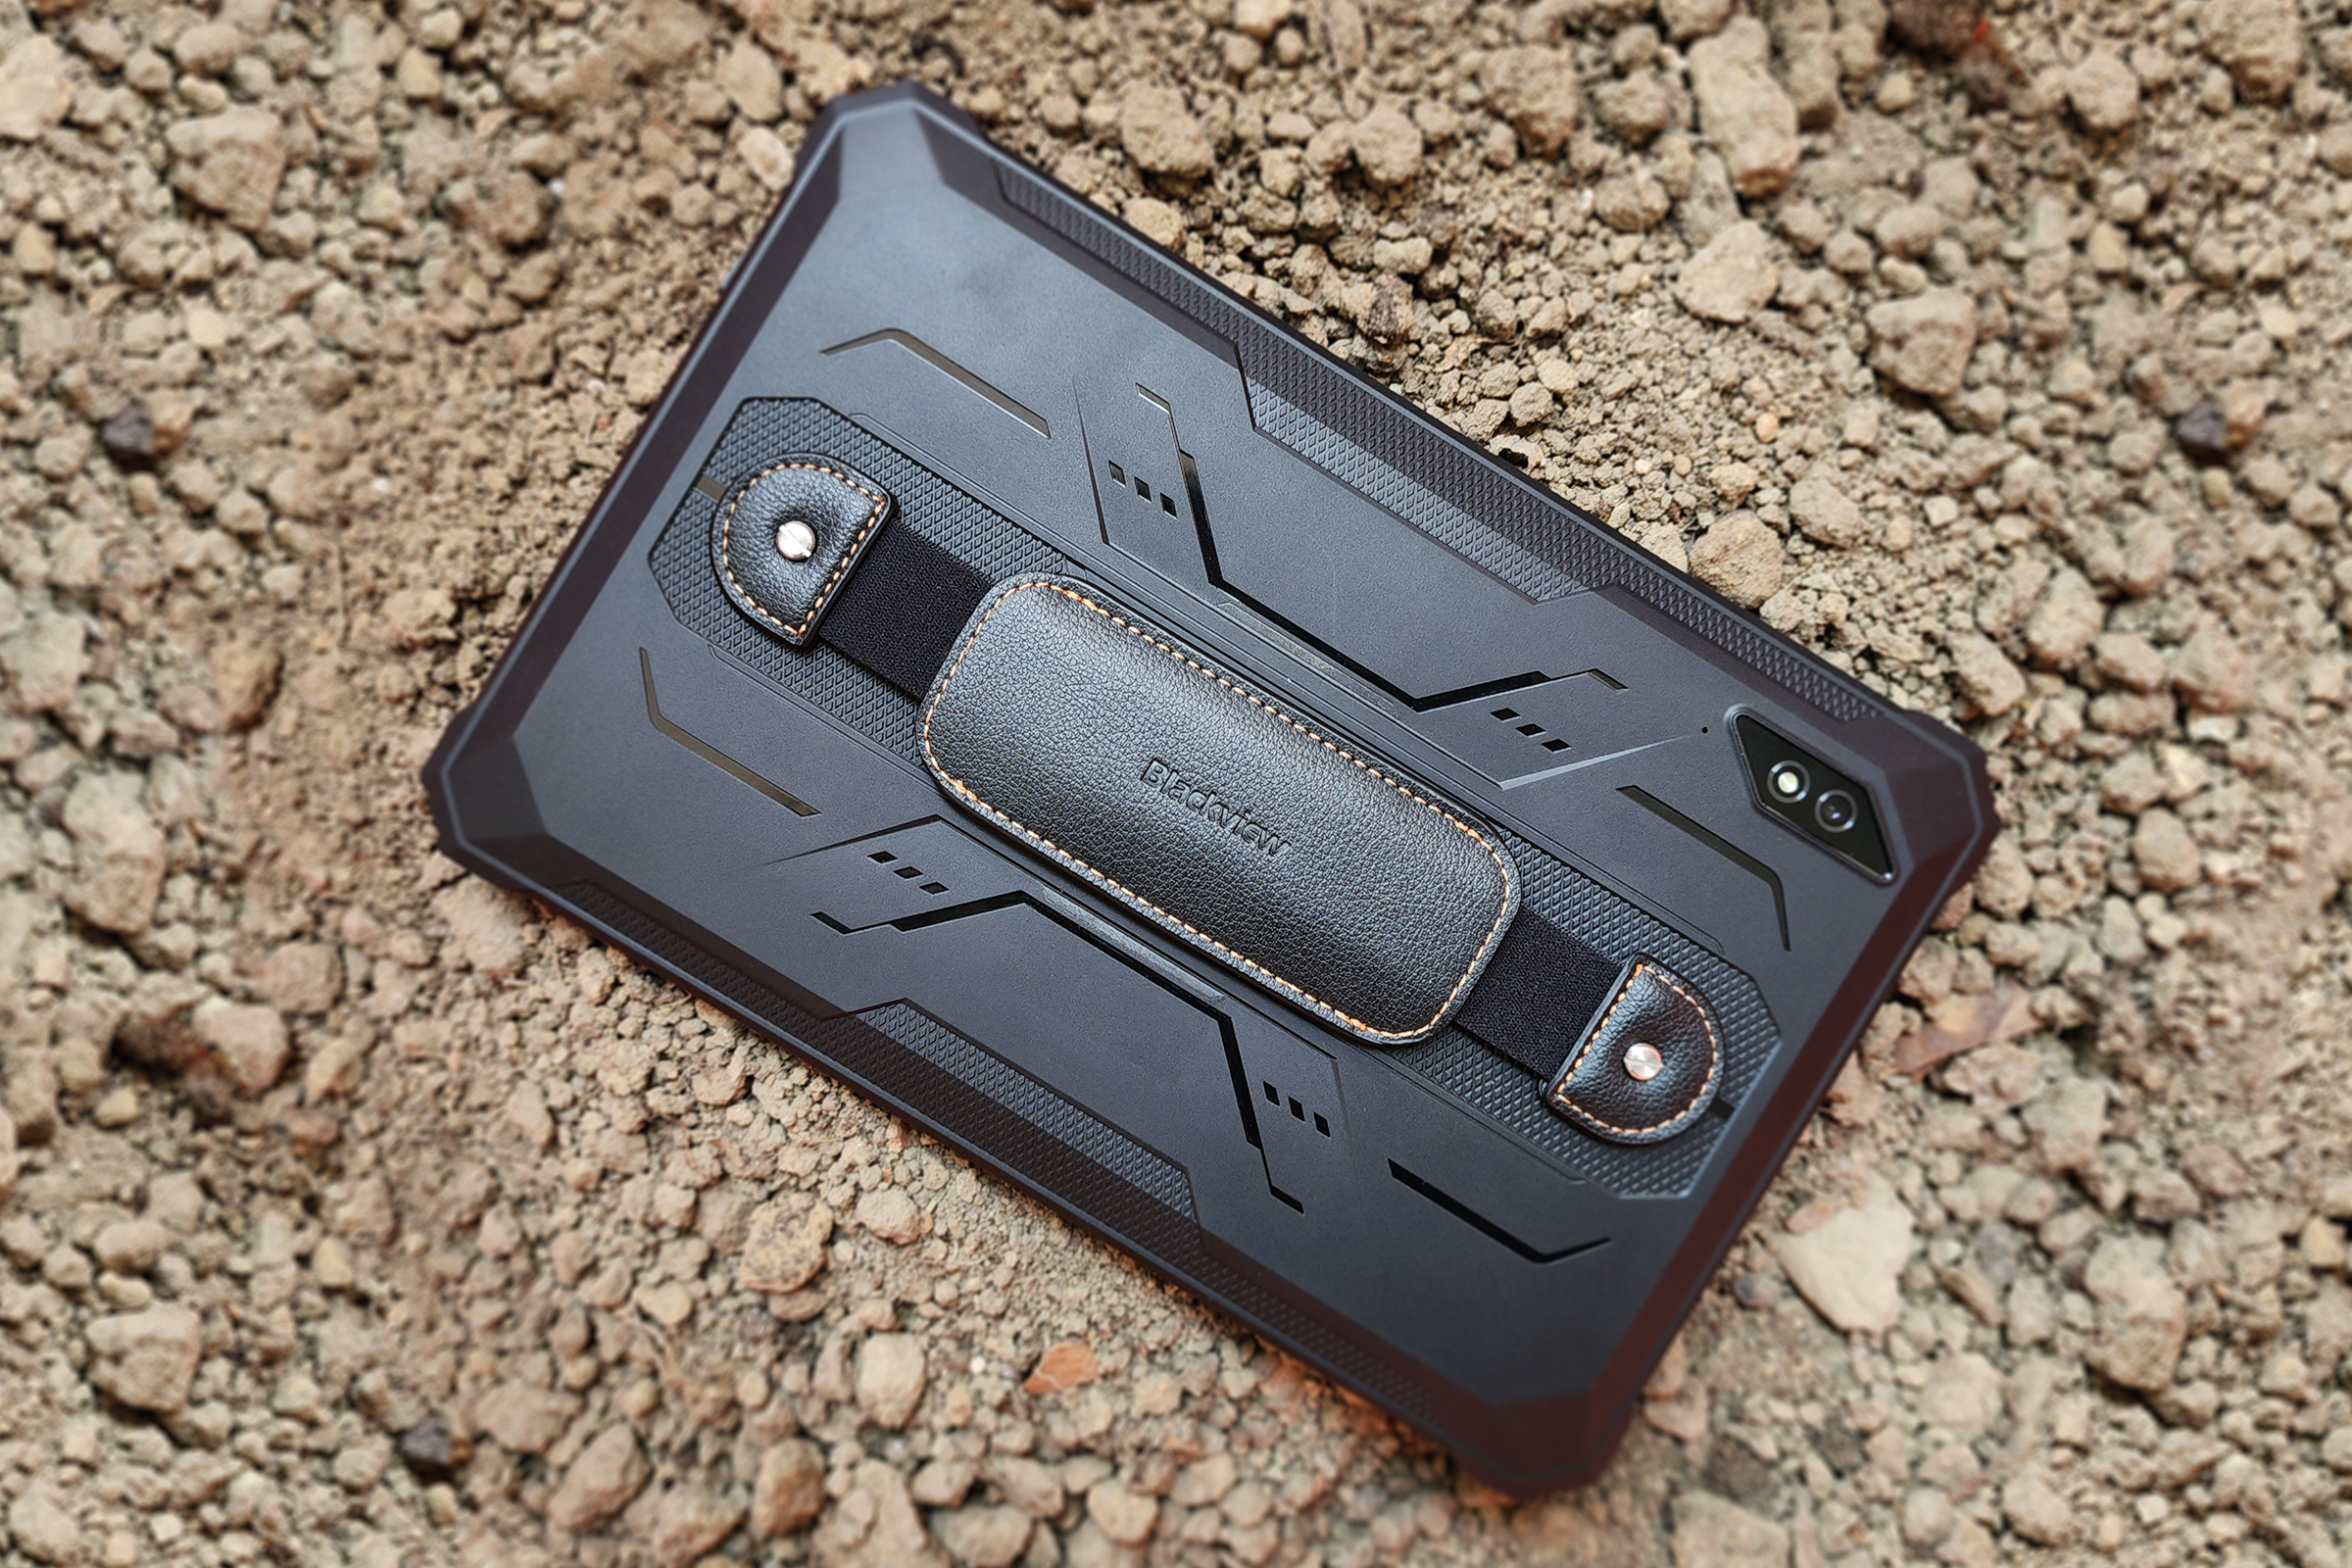 New Blackview Active 8 Pro can be the ultimate rugged tablet for